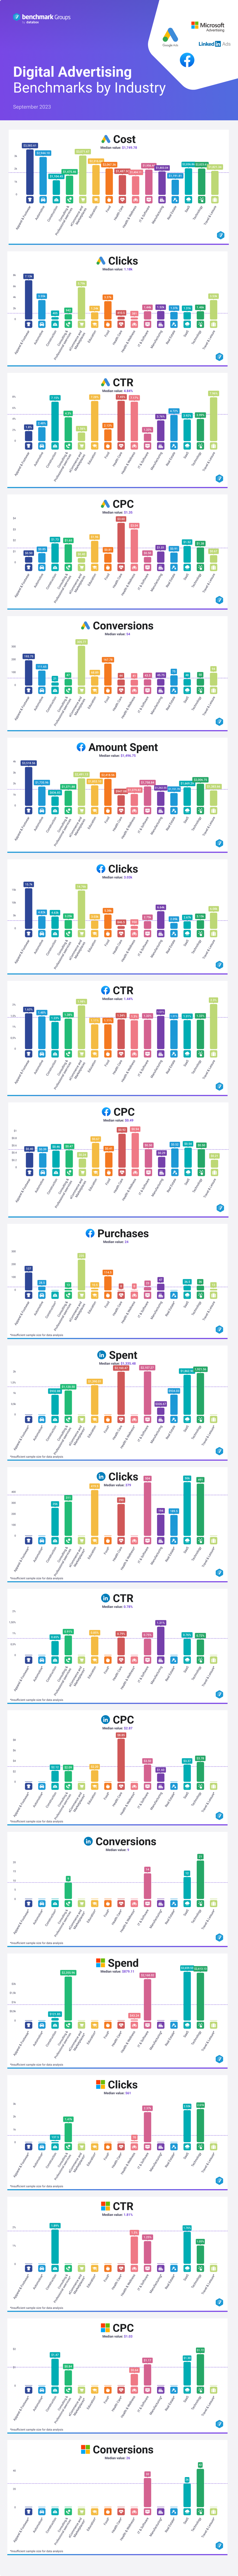 Digital Advertising Benchmarks by Industry Infographic